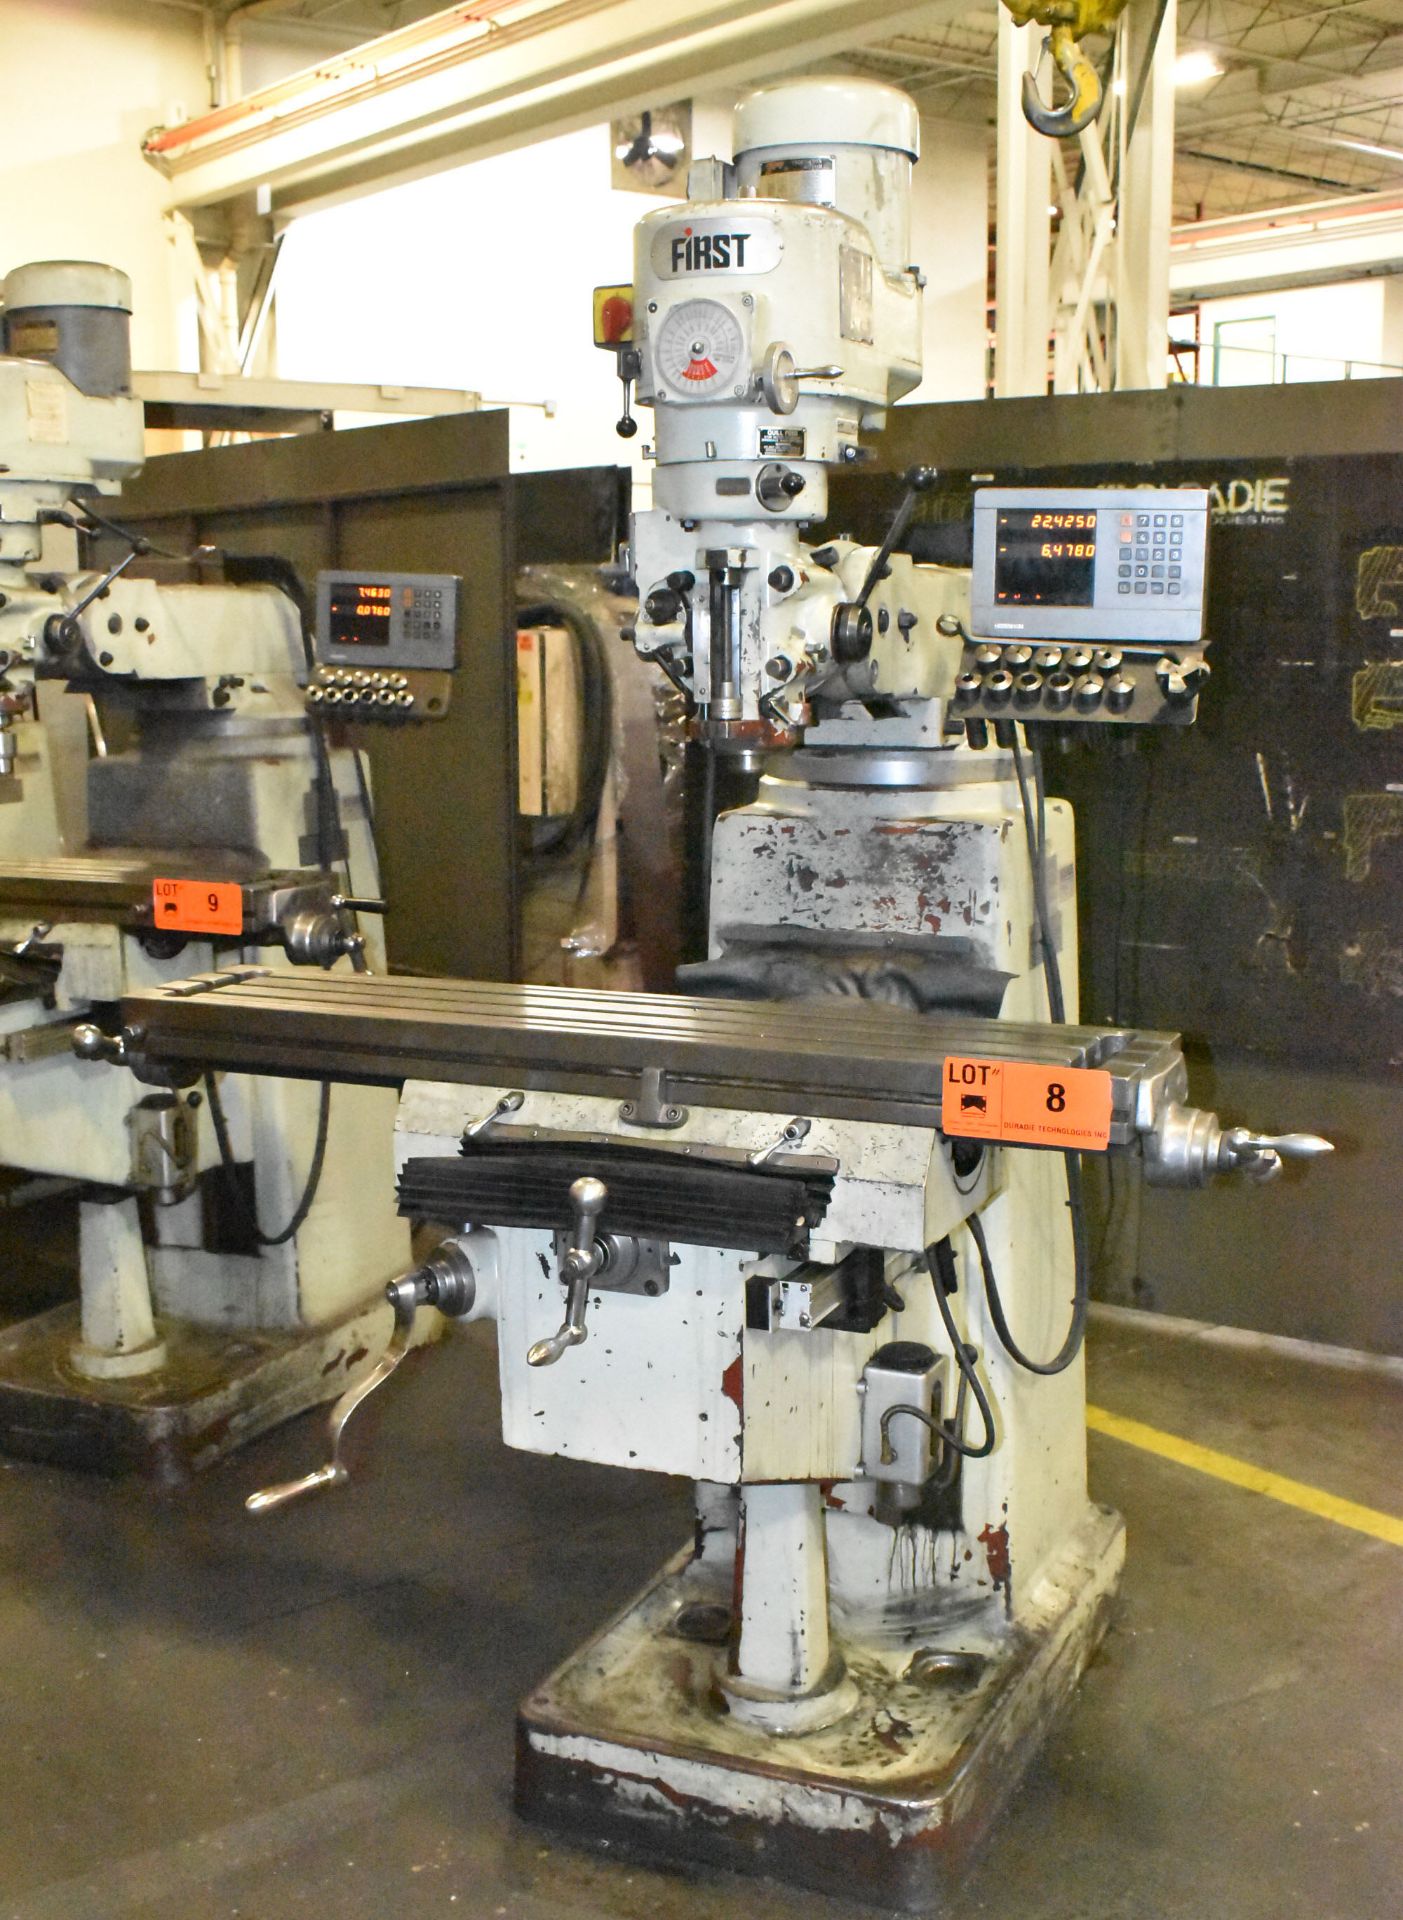 FIRST VERTICAL TURRET MILL WITH 10" X 50" T-SLOT TABLE, R8 SPINDLE TAPER, SPEEDS TO 4500 RPM,